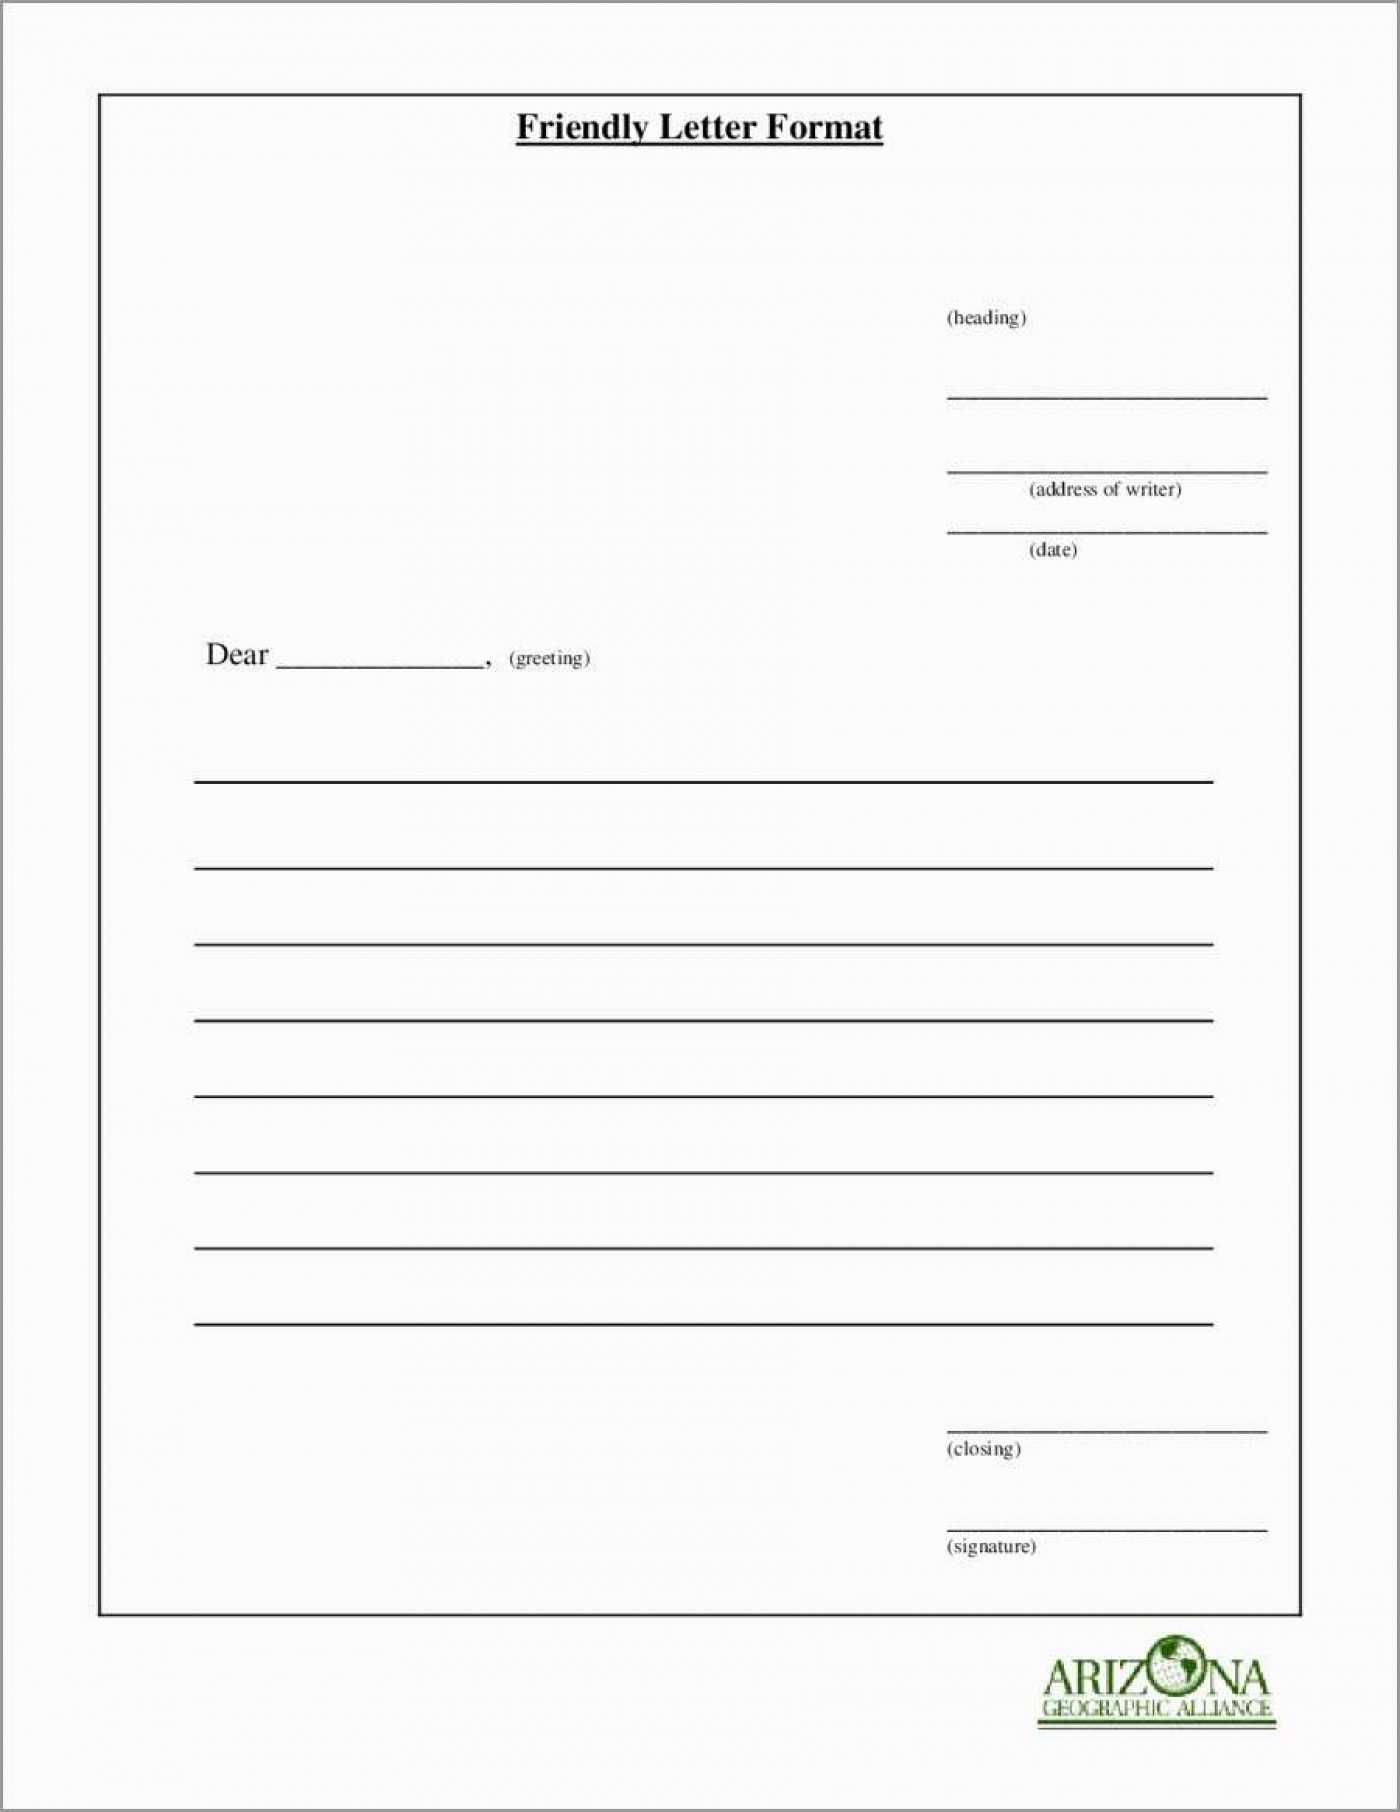 018 Summer Camp Letter Writing Templates For Kids Template Intended For Blank Letter Writing Template For Kids